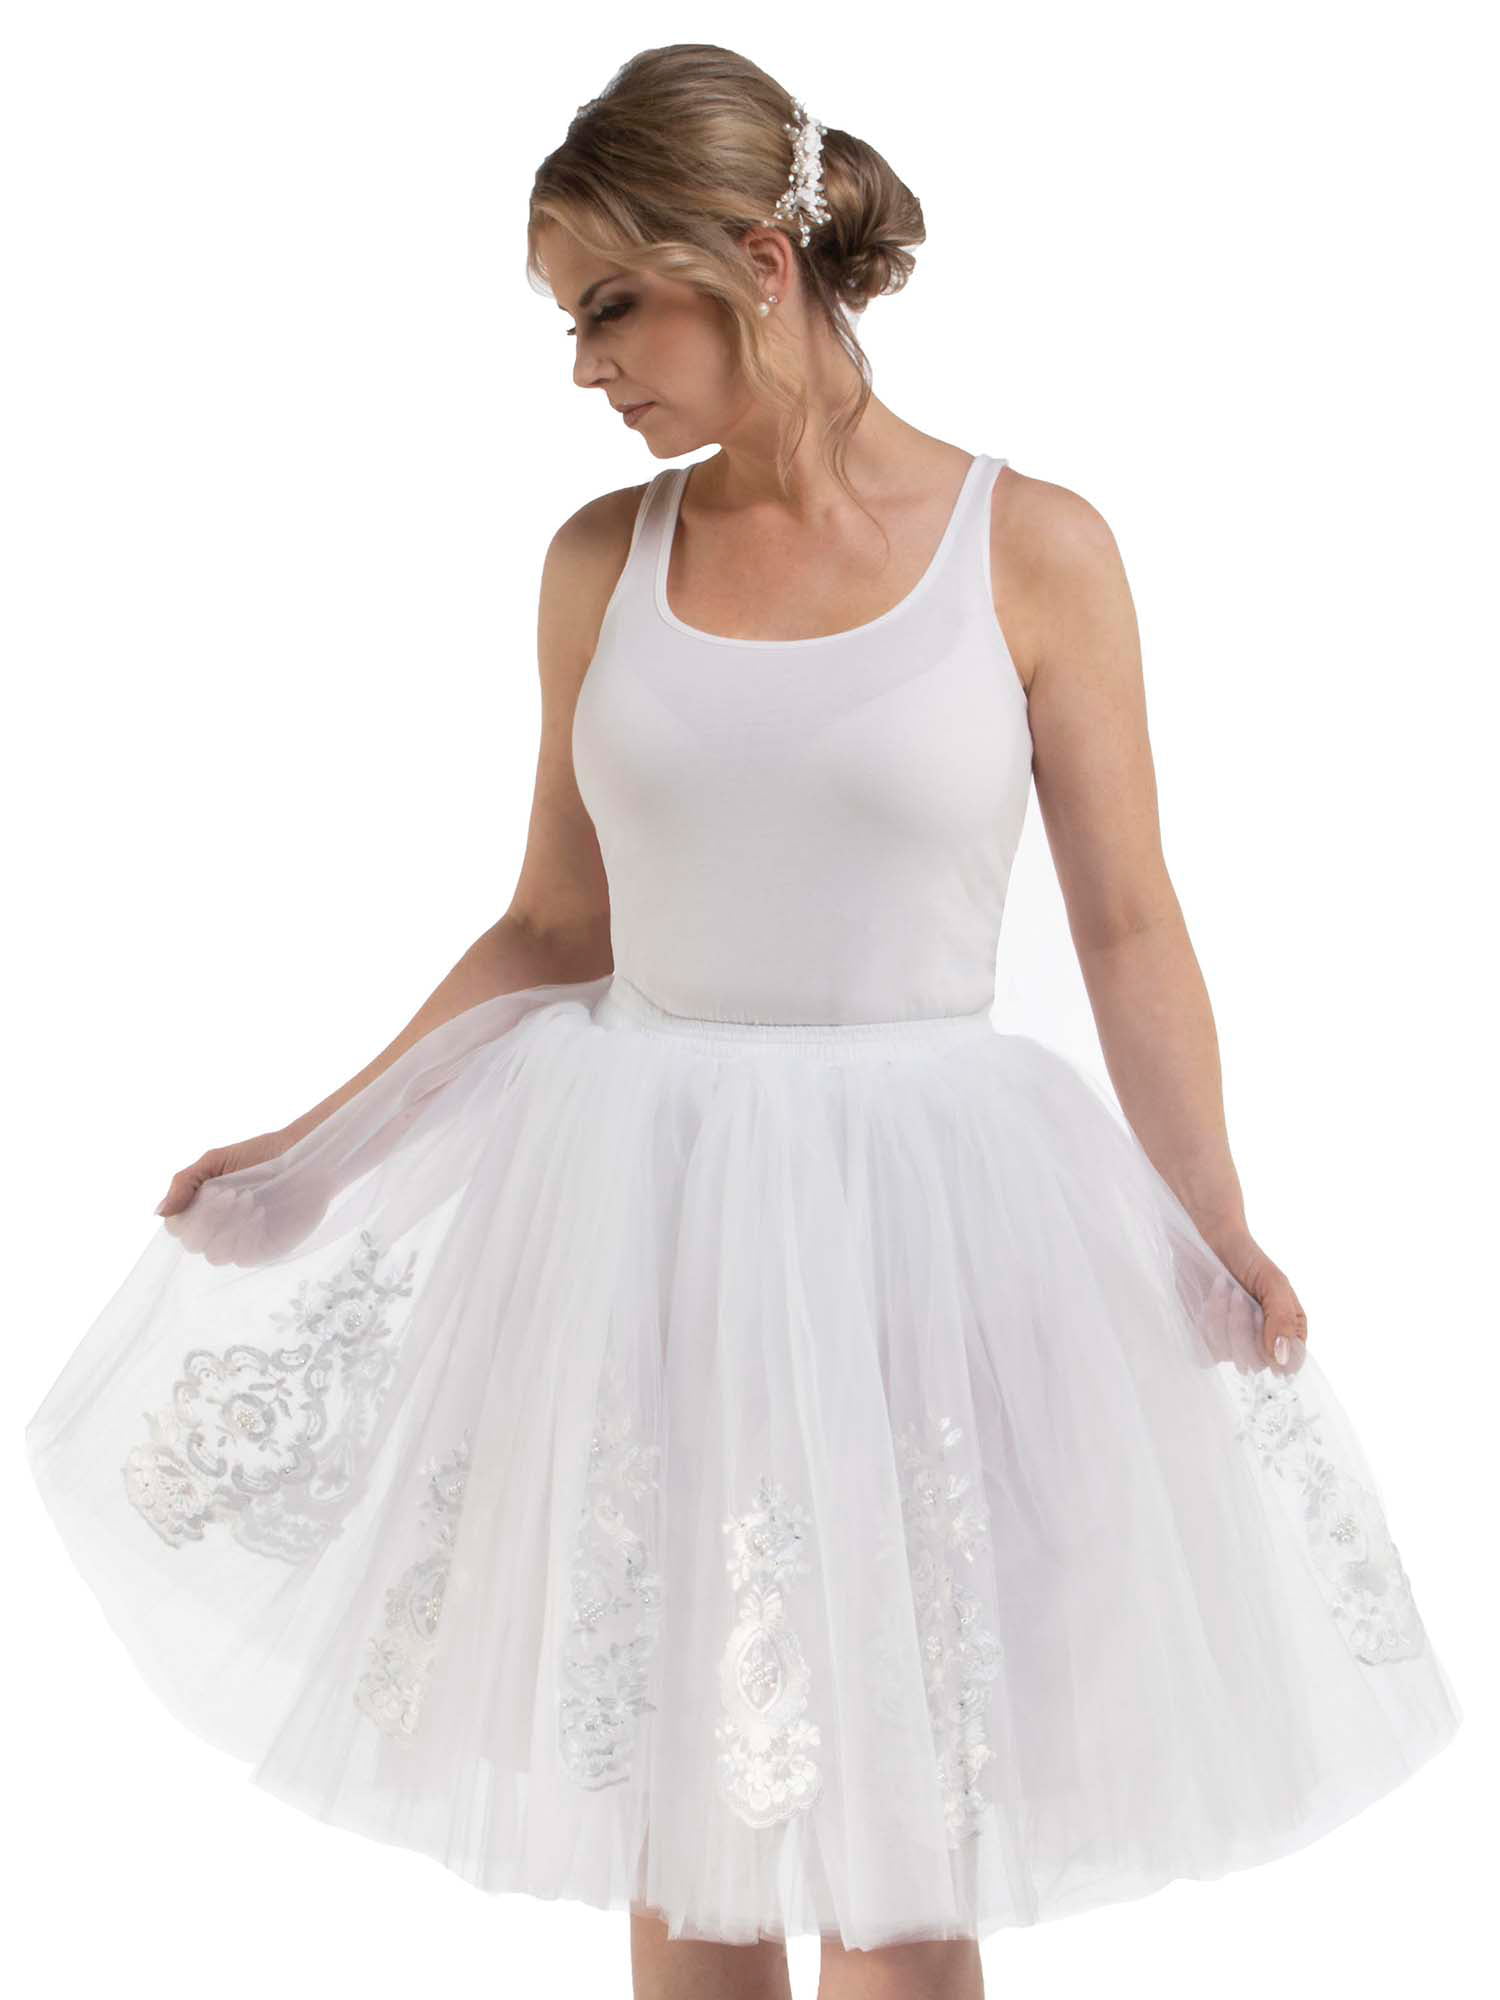 white dress with tulle skirt